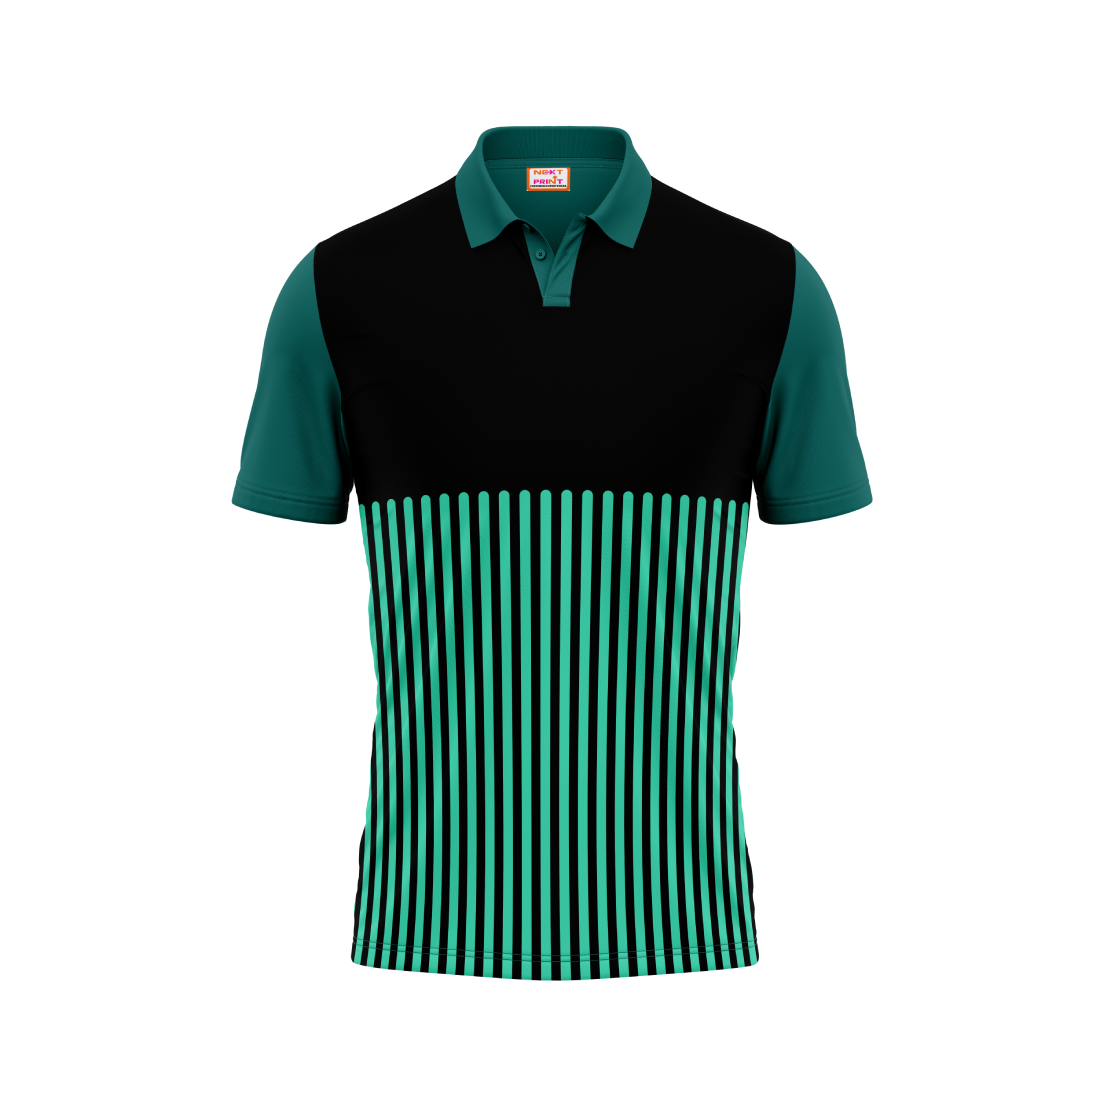 Polo Neck Printed Jersey Green NP50000364